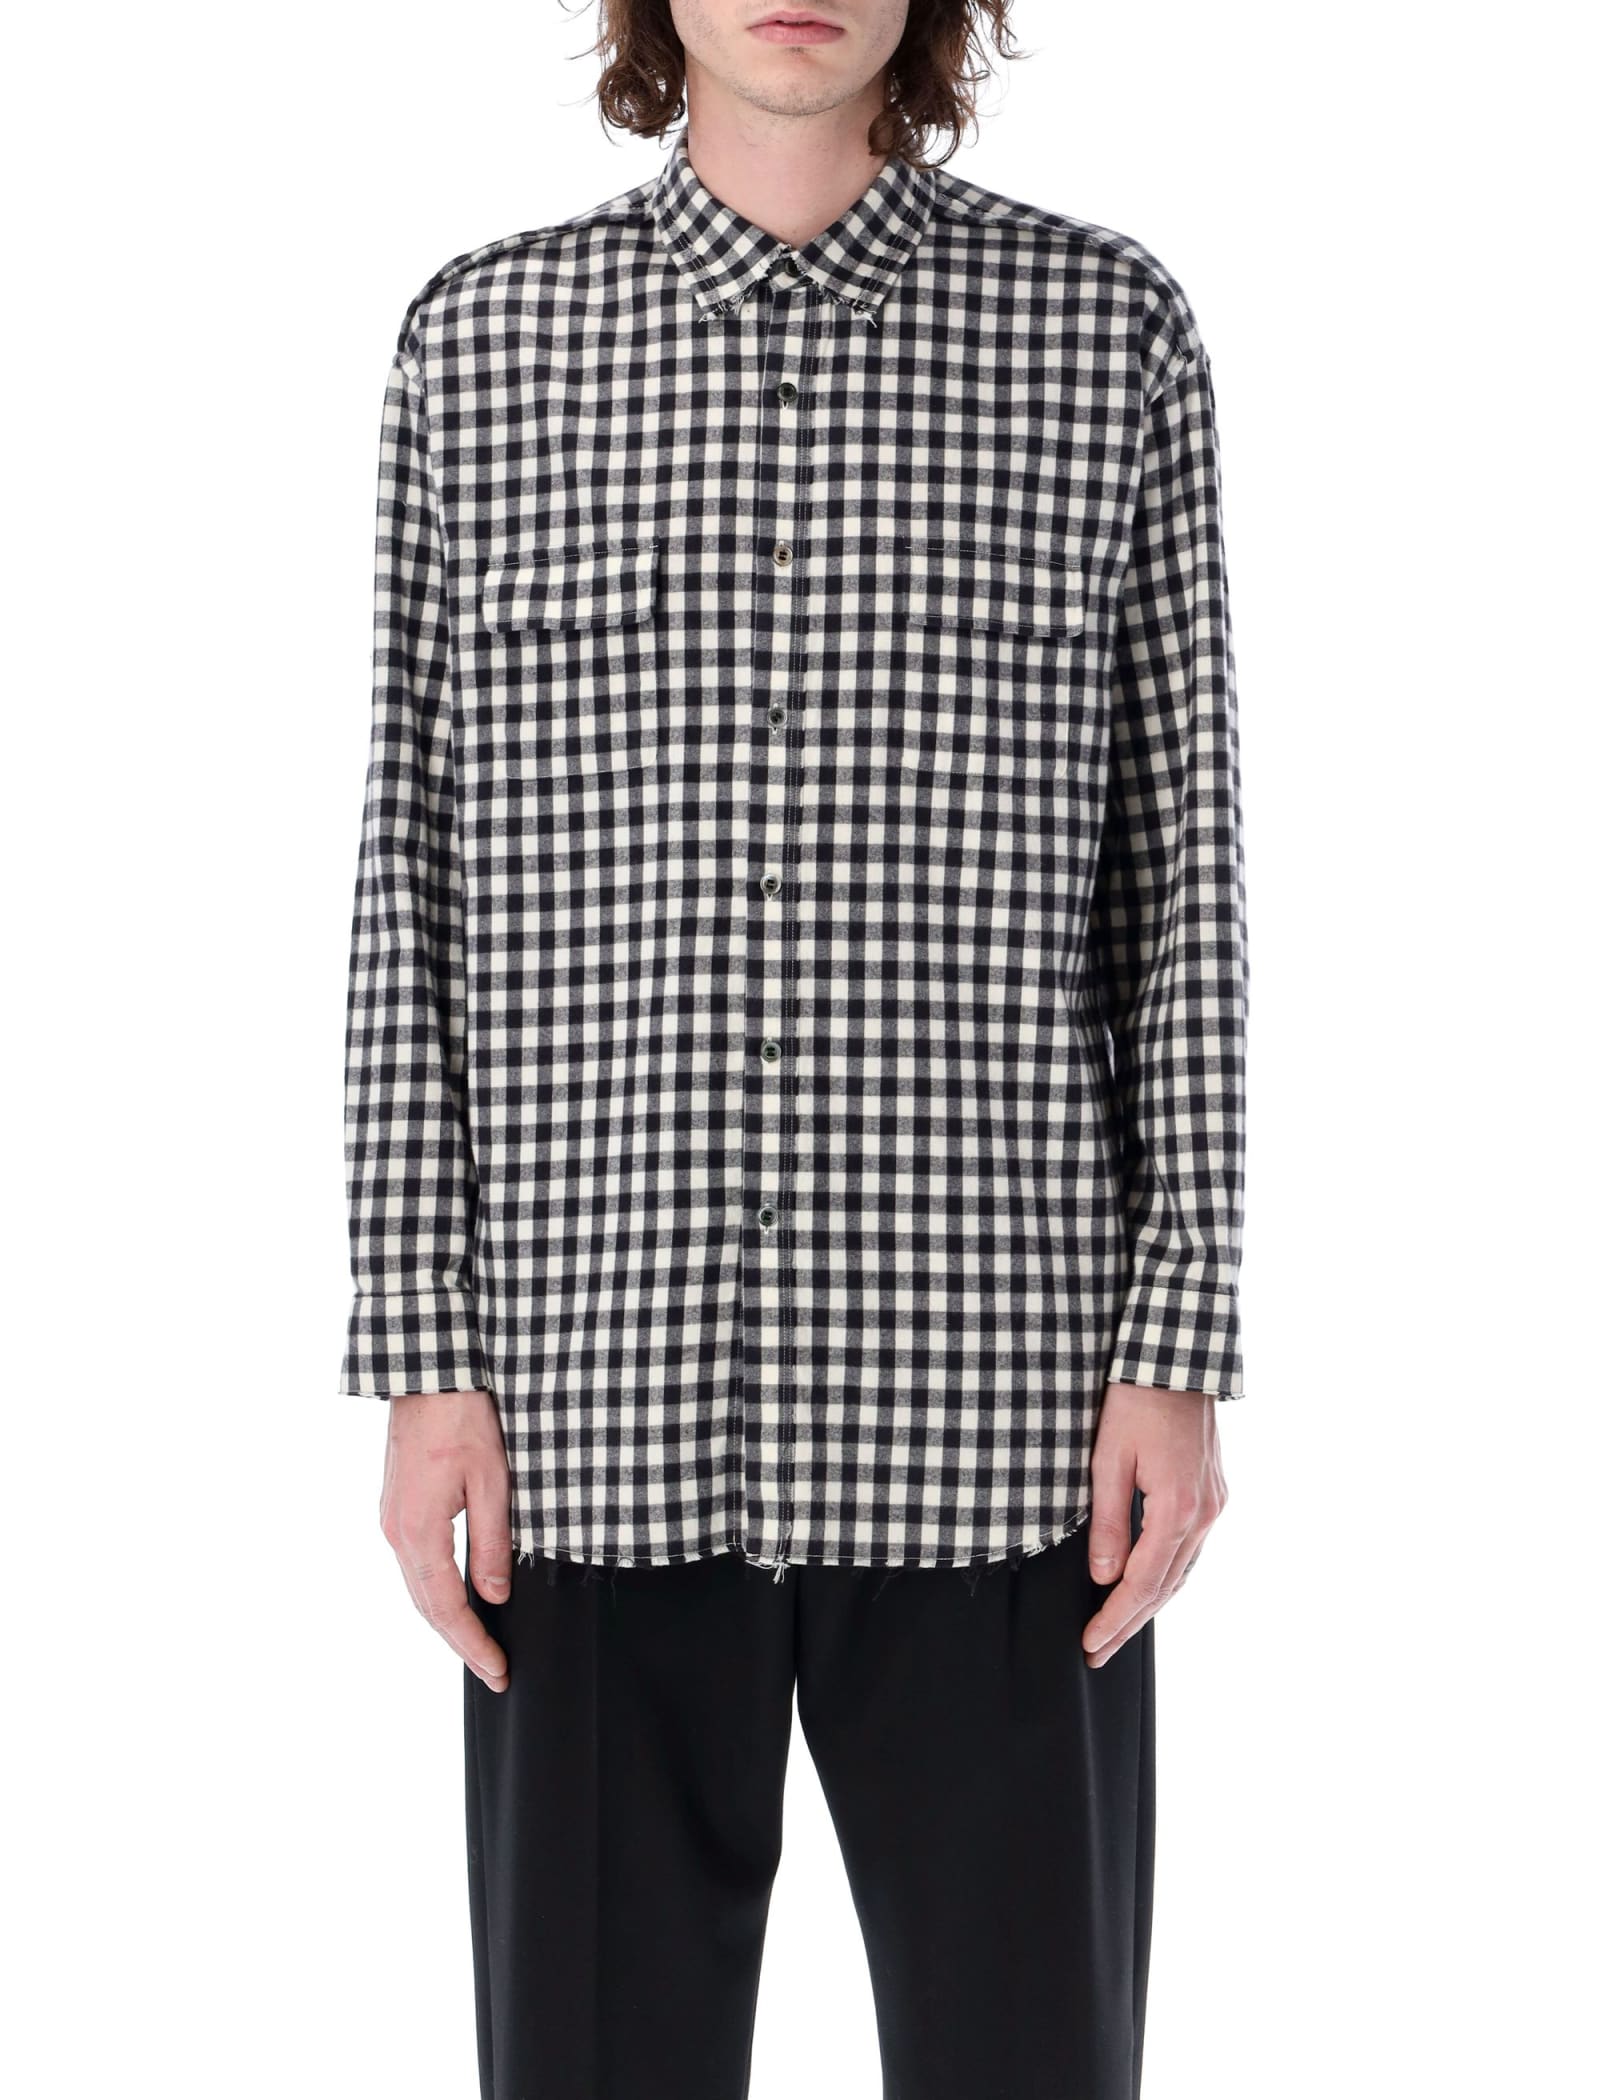 UNDERCOVER FLANNEL CHECK SHIRT